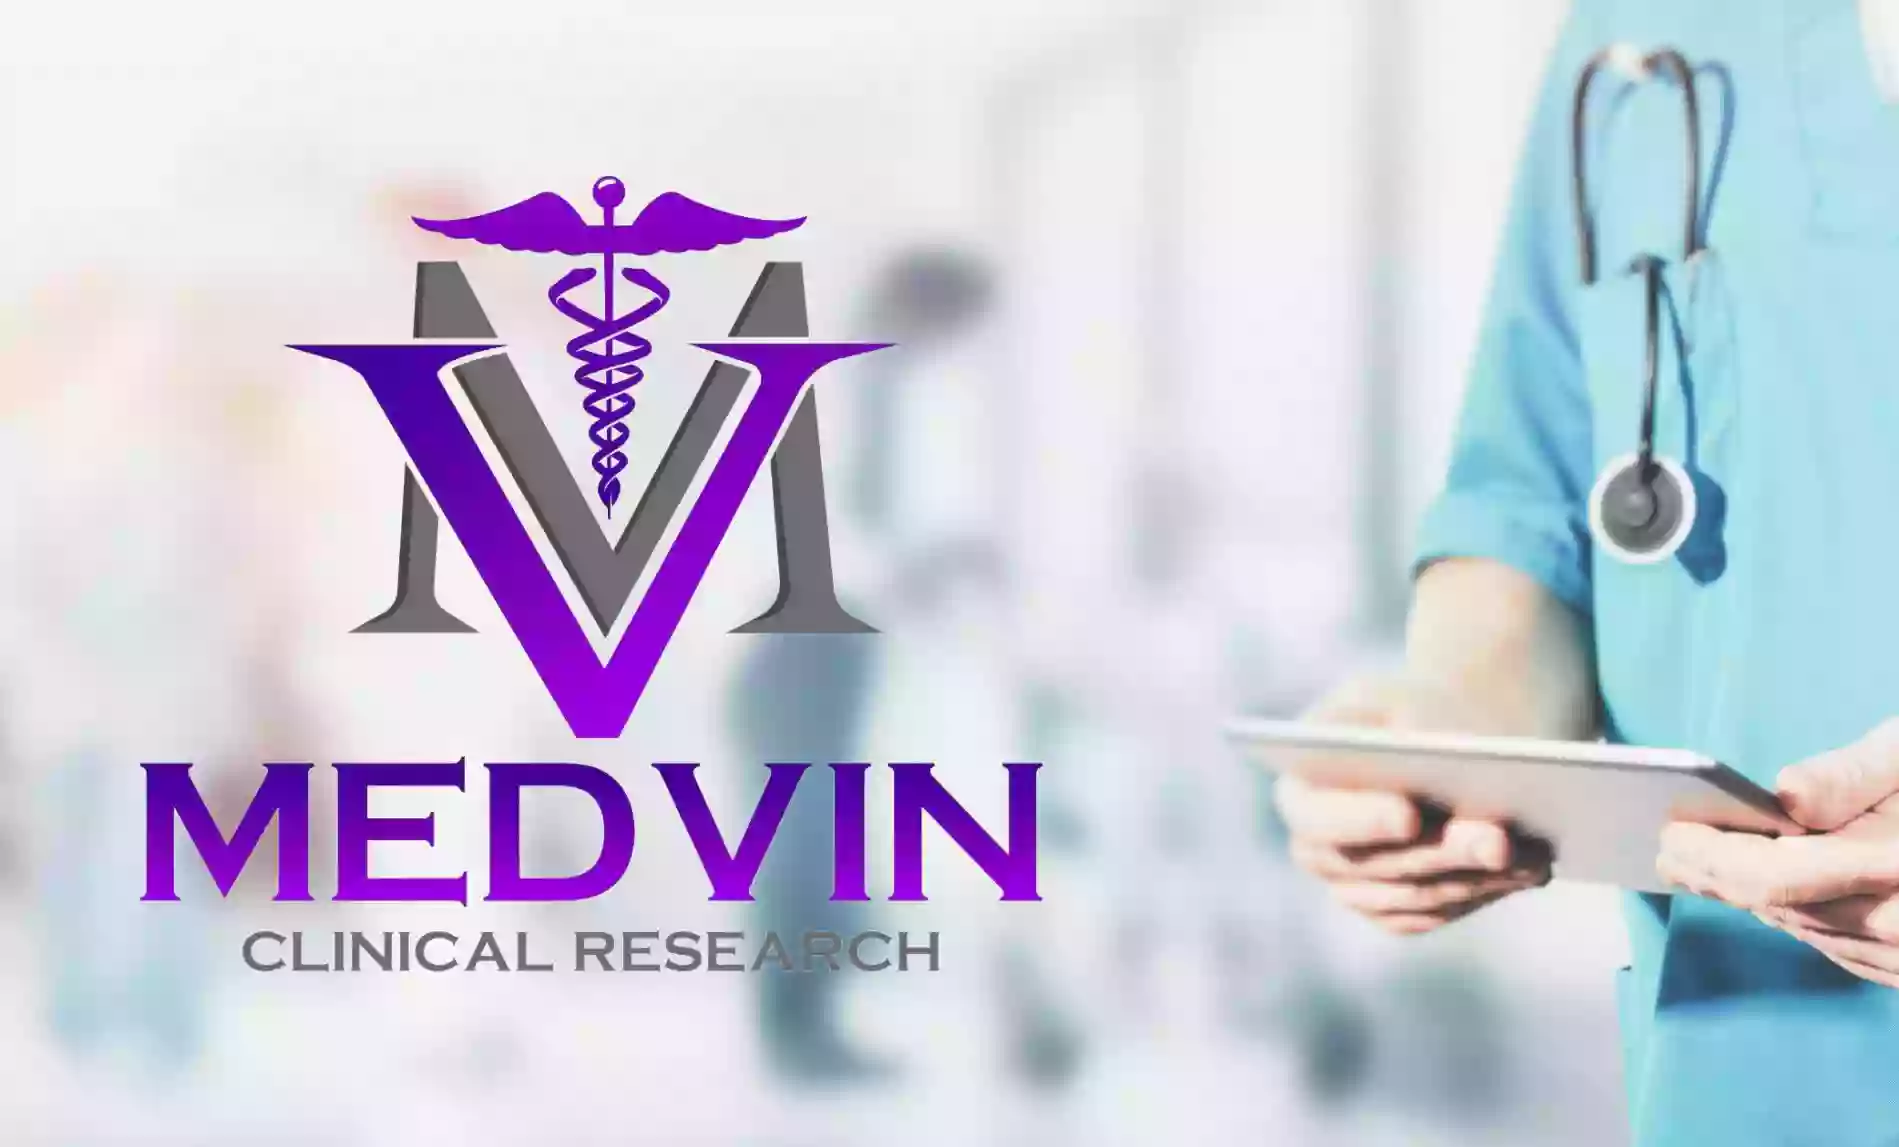 Medvin Clinical Research - Paid Clinical Research in Rheumatology